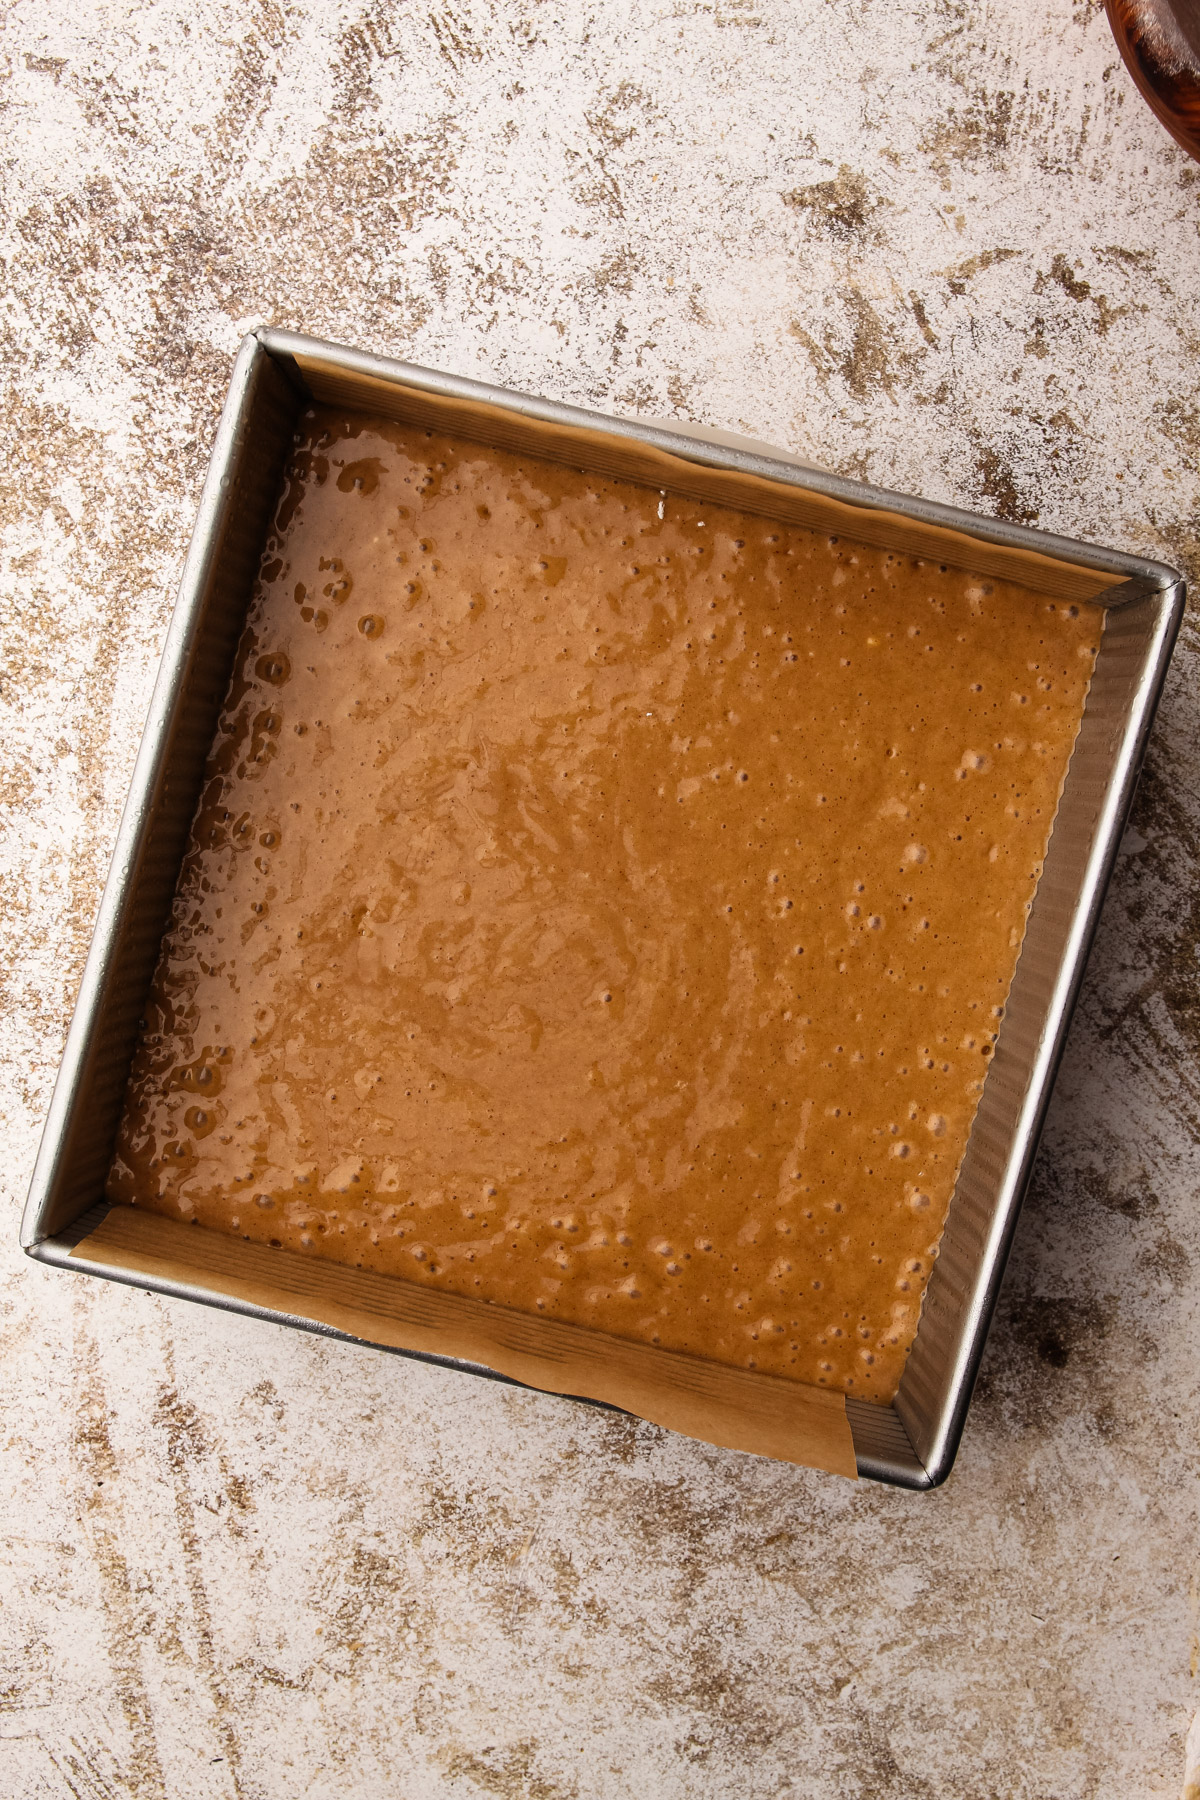 Brown, bubbly cake batter in a parchment-lined 8-inch square metal baking pan